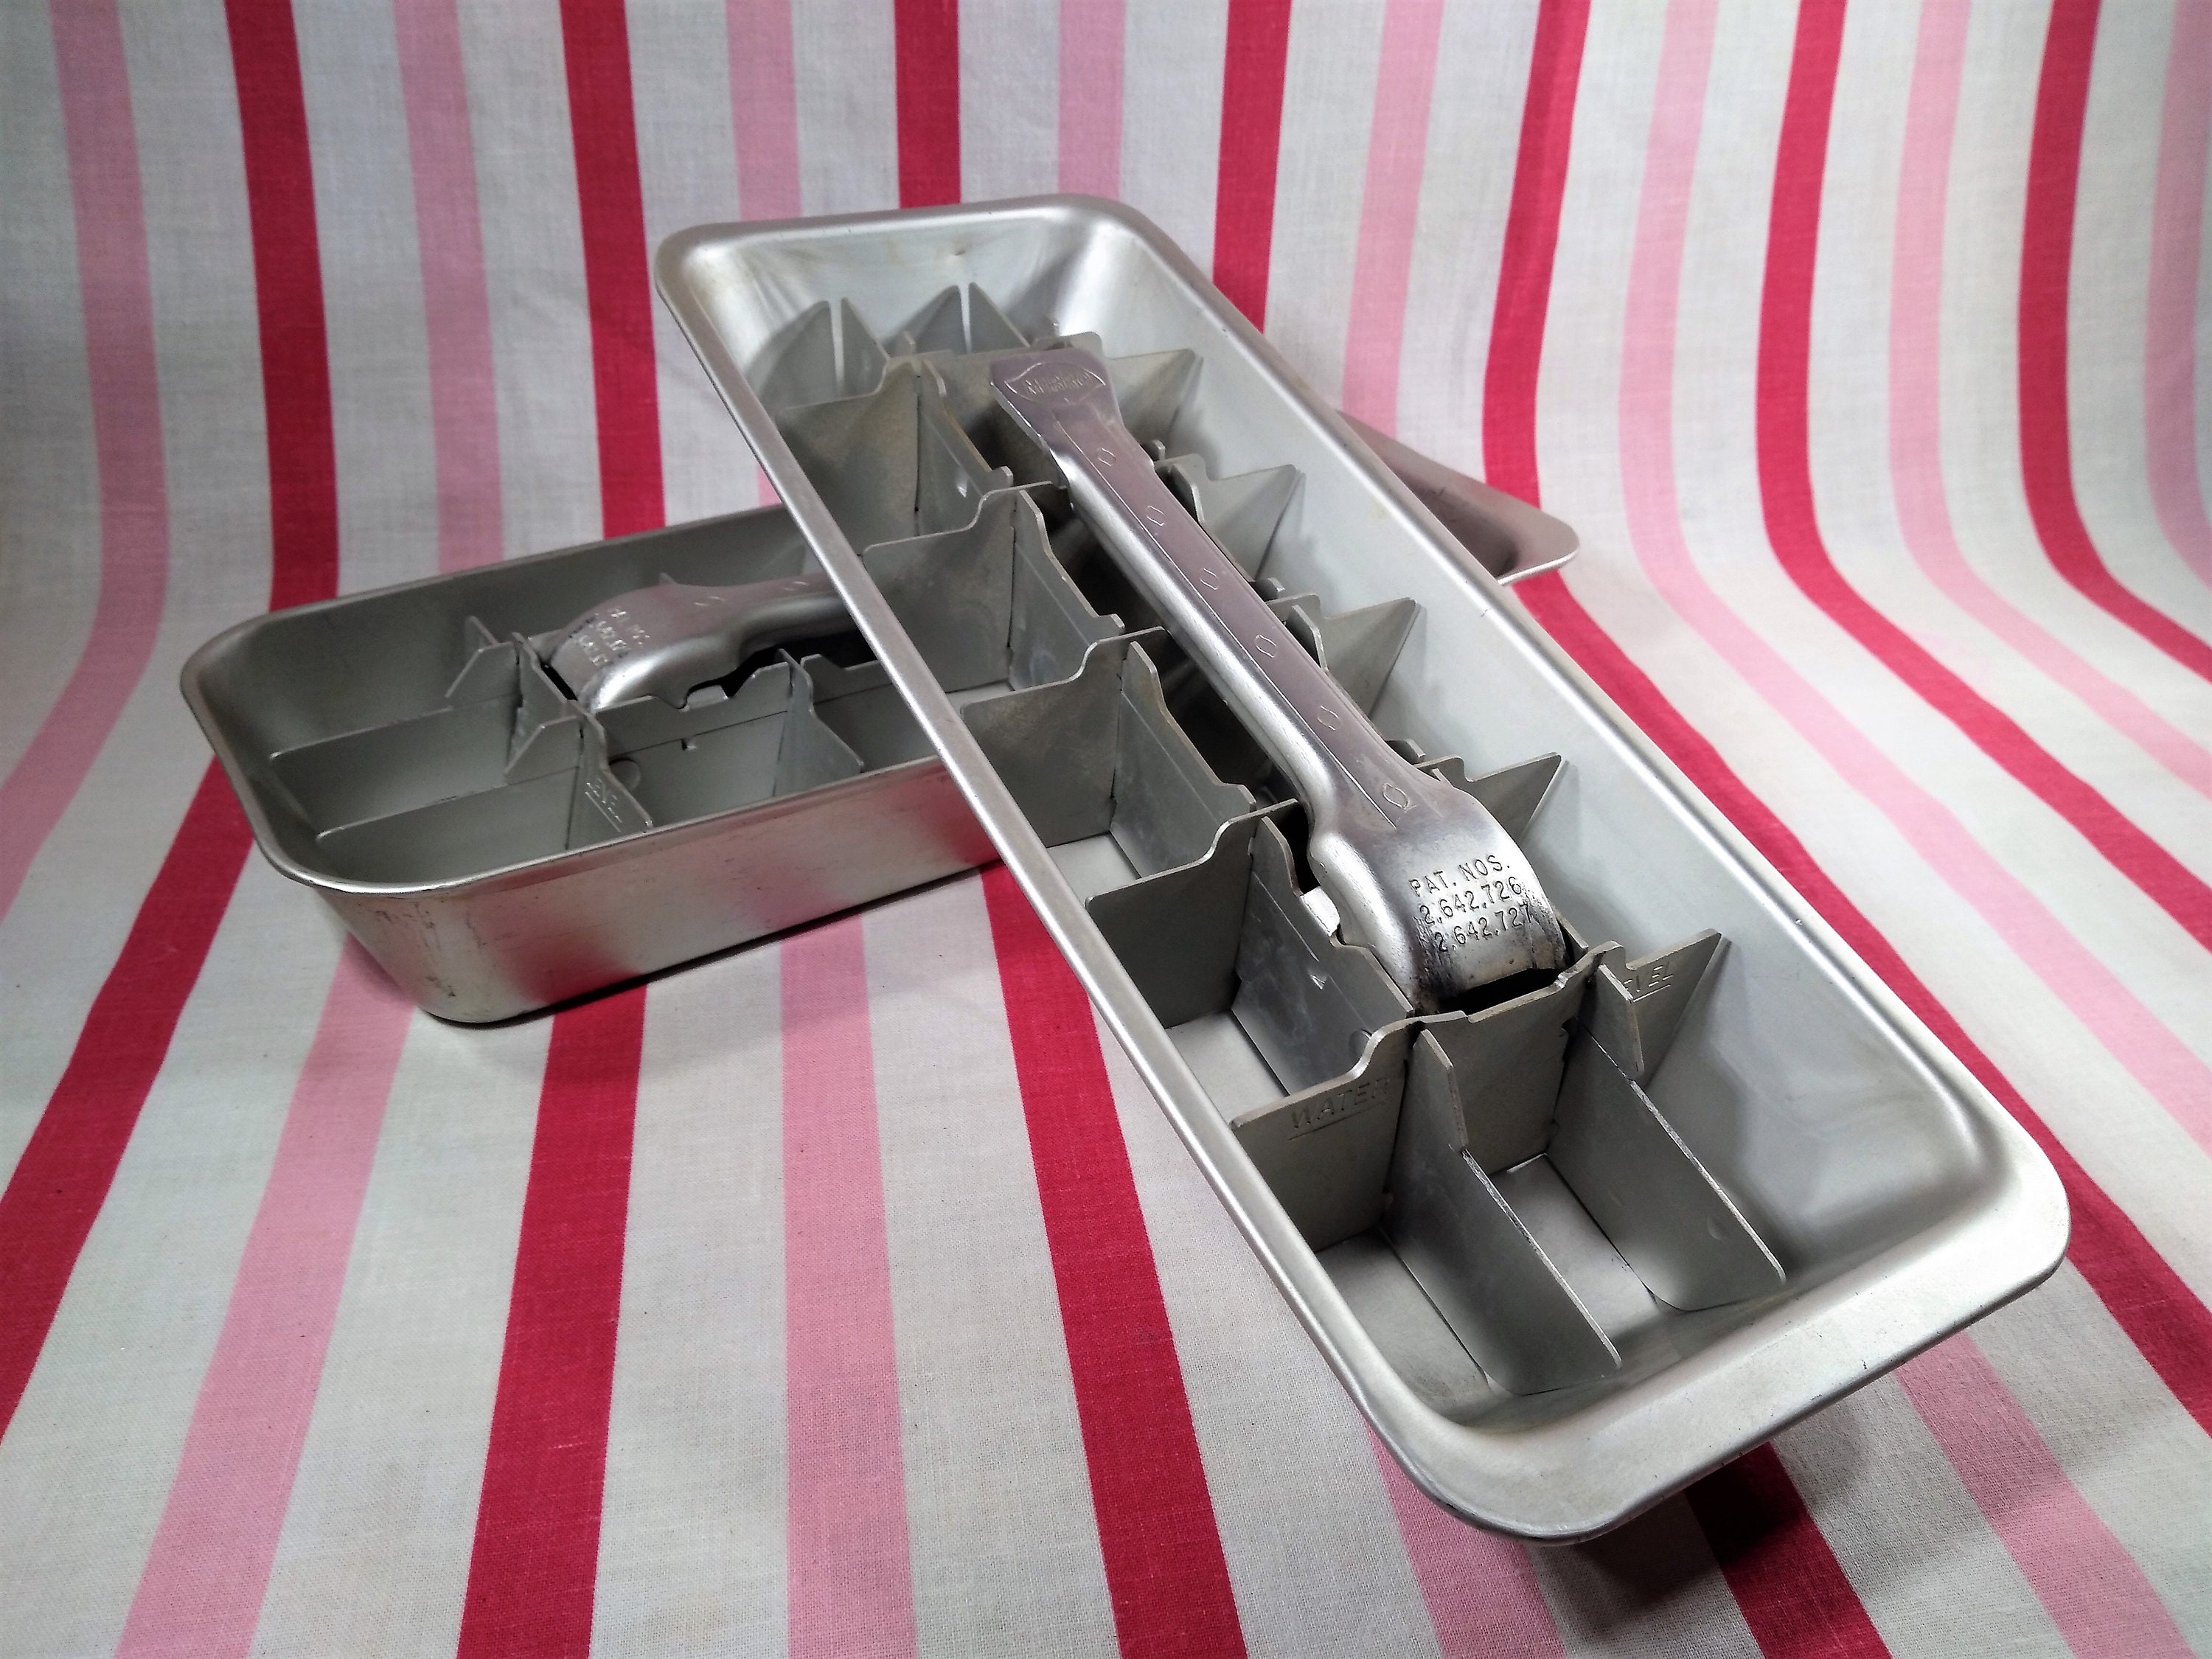 Vintage Set of 3 unbranded Old fashioned ice cube trays about 1950’s